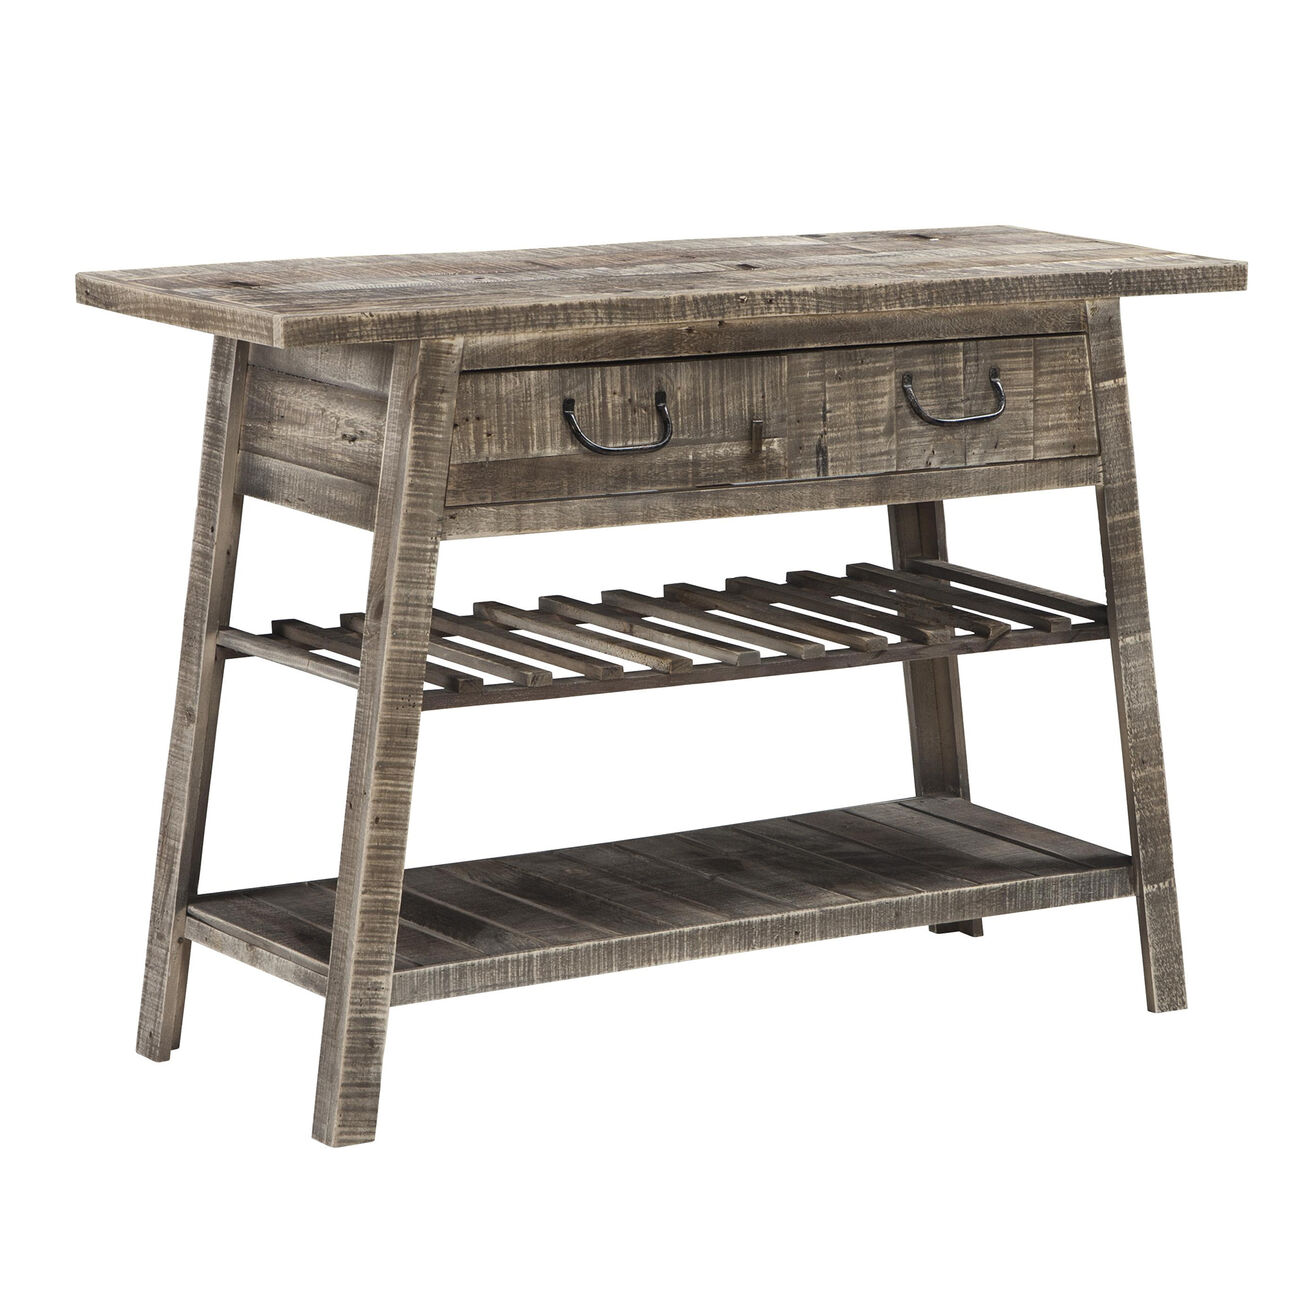 1 Drawer and 2 Shelves Reclaimed Wood Console Table with Angled Legs, Gray